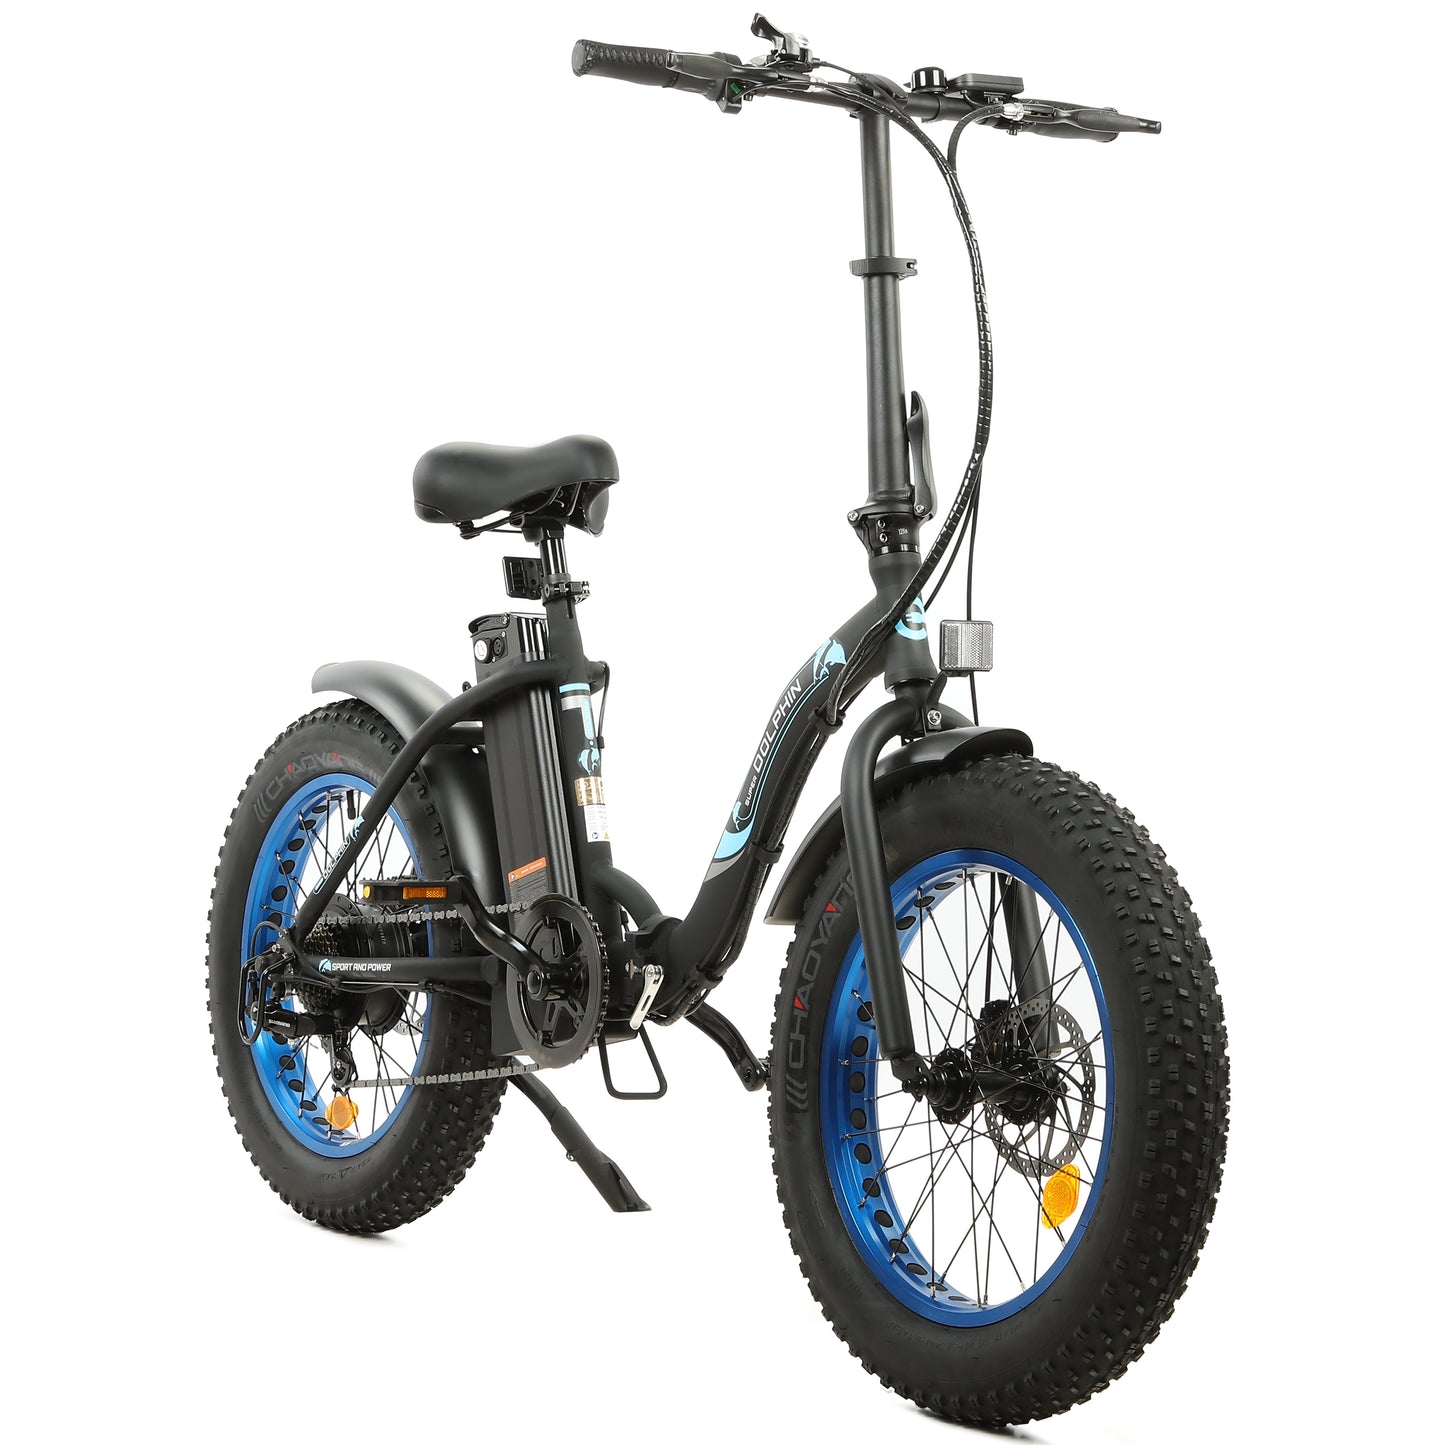 UL Certified-Ecotric Portable and Folding Fat Bike Model Dolphin - Black and Blue